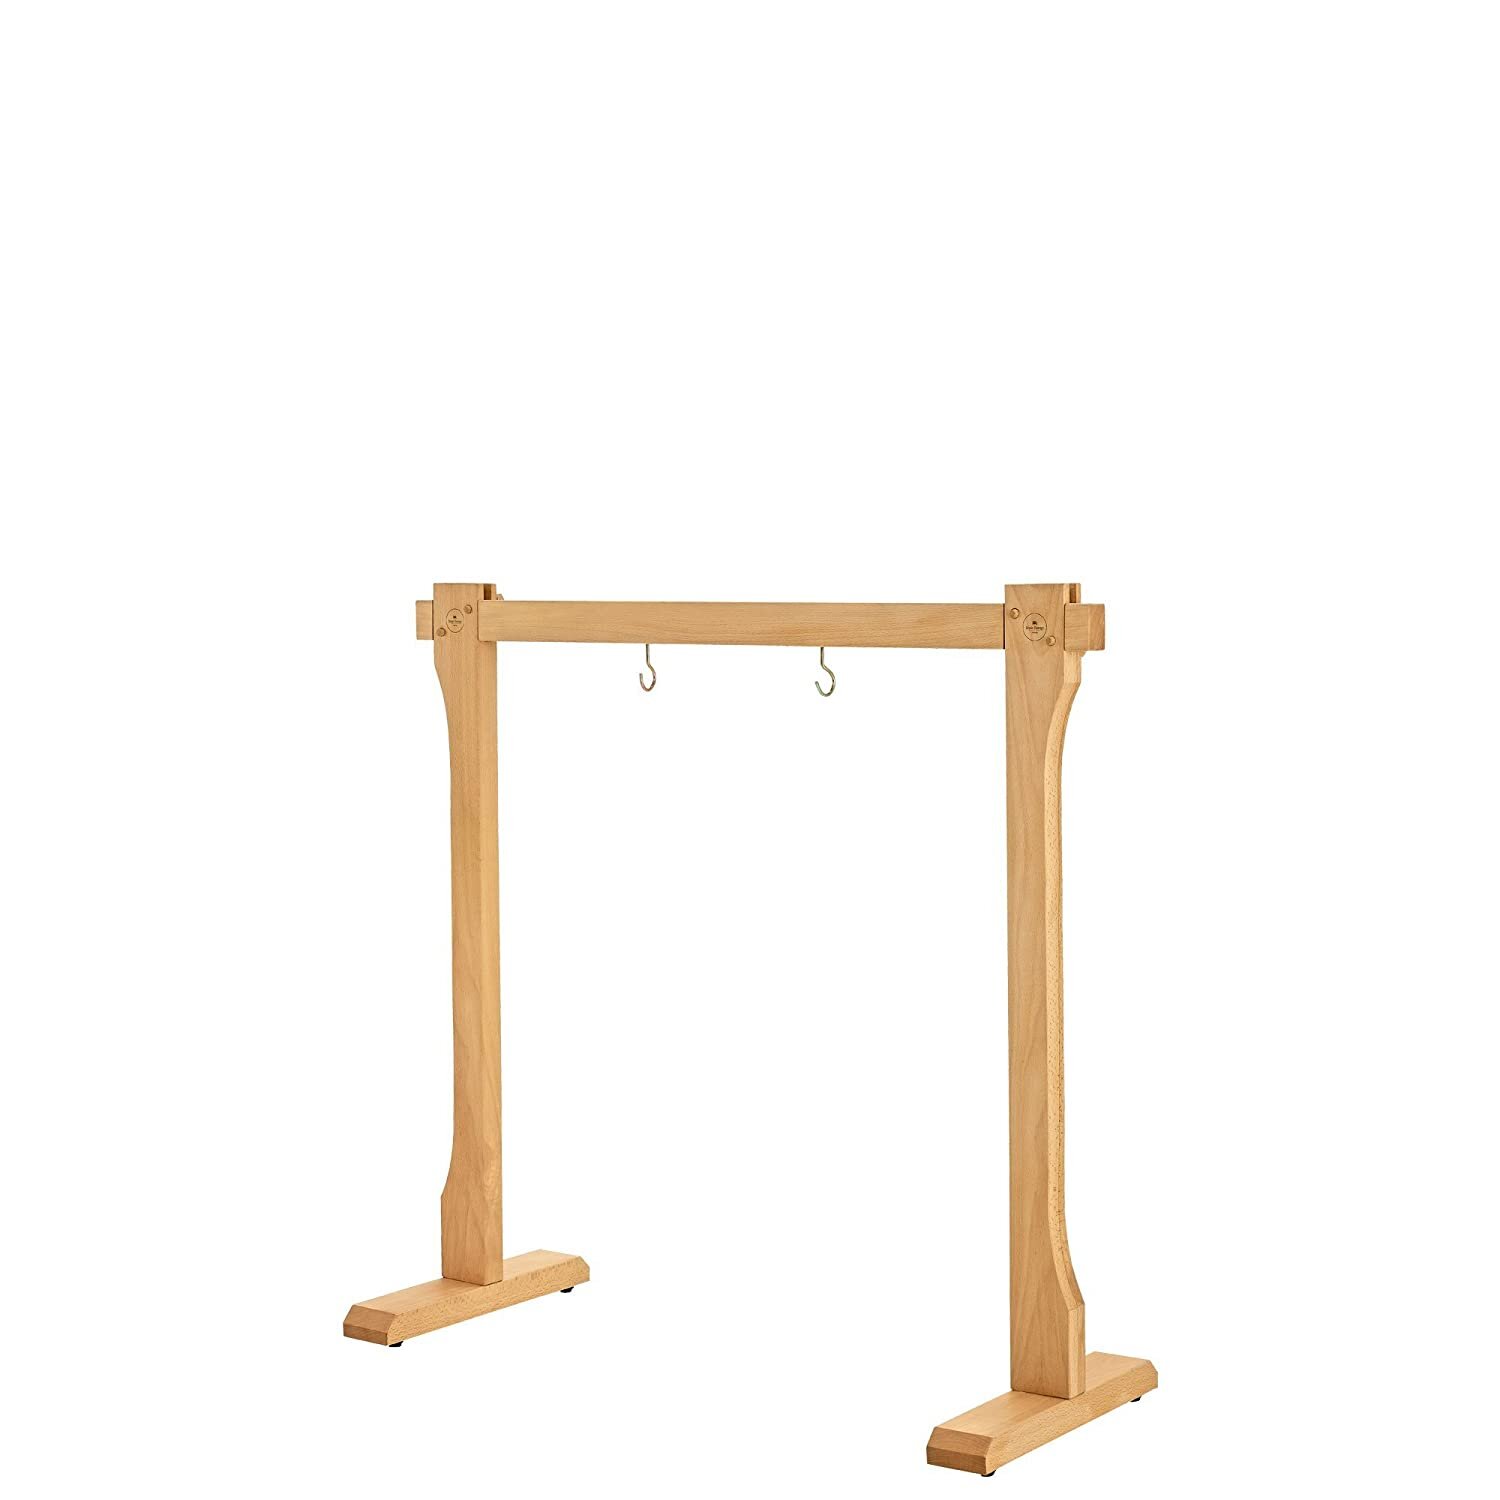 Meinl Gong Stands Wood Gong Stand - Medium; Up to 34 